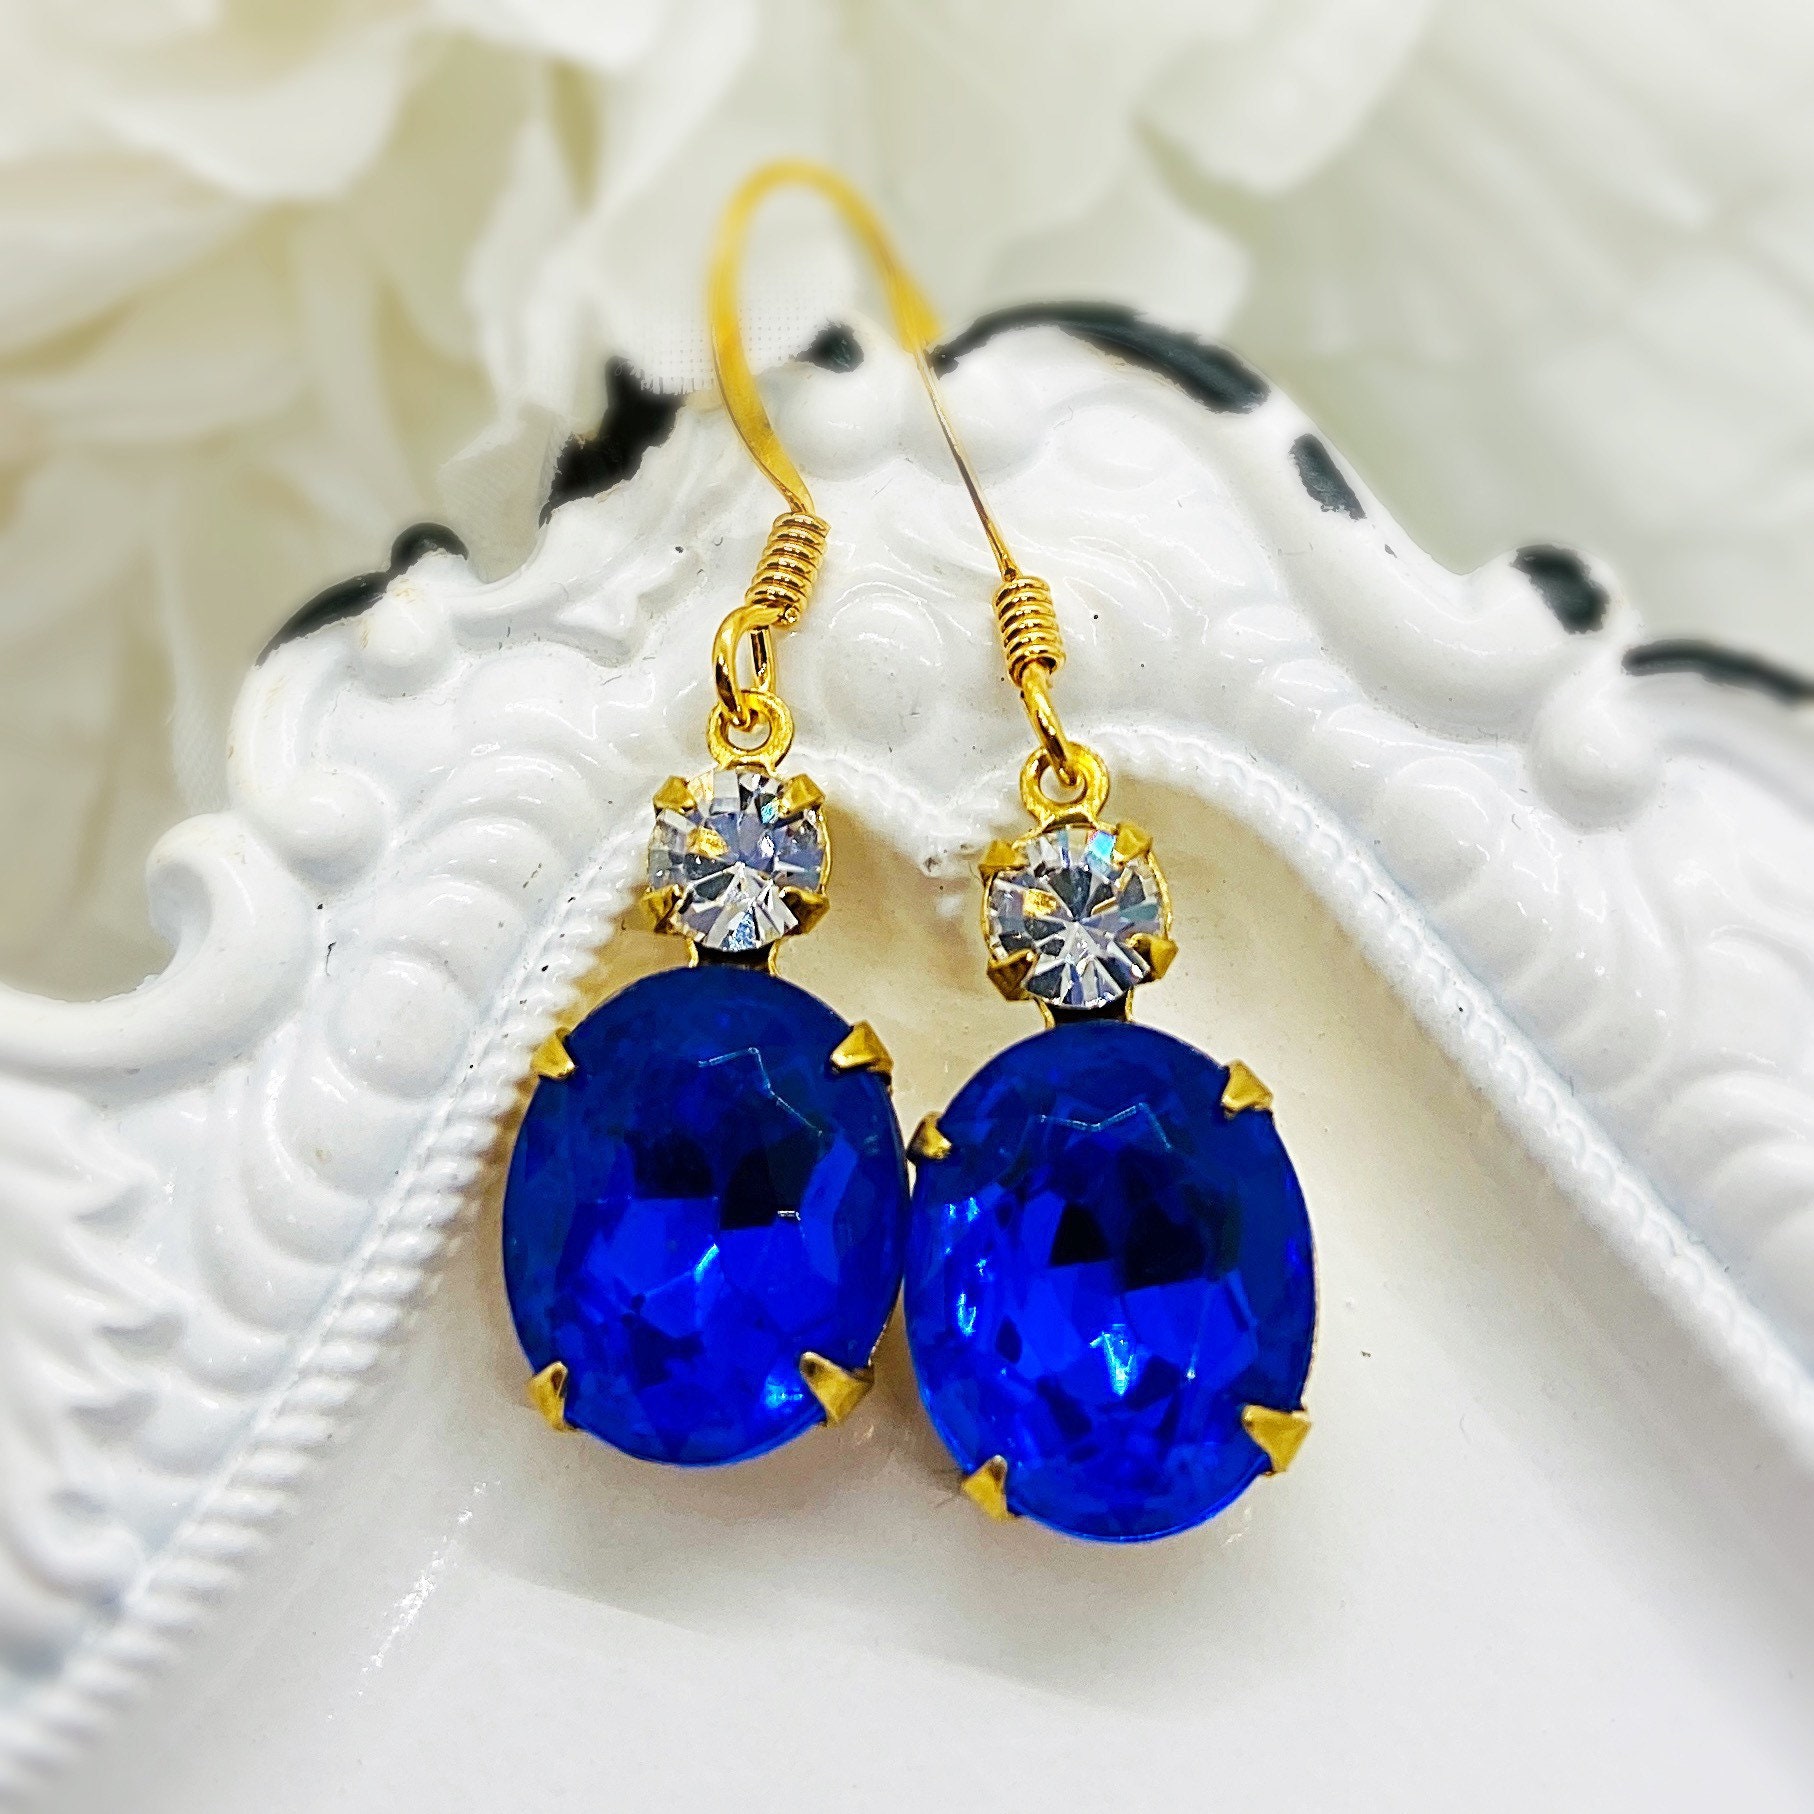 boho earrings for bridesmaids mothers day gift for sister wedding jewelry blue best sellers 2022 blue earrings dangle floral earrings